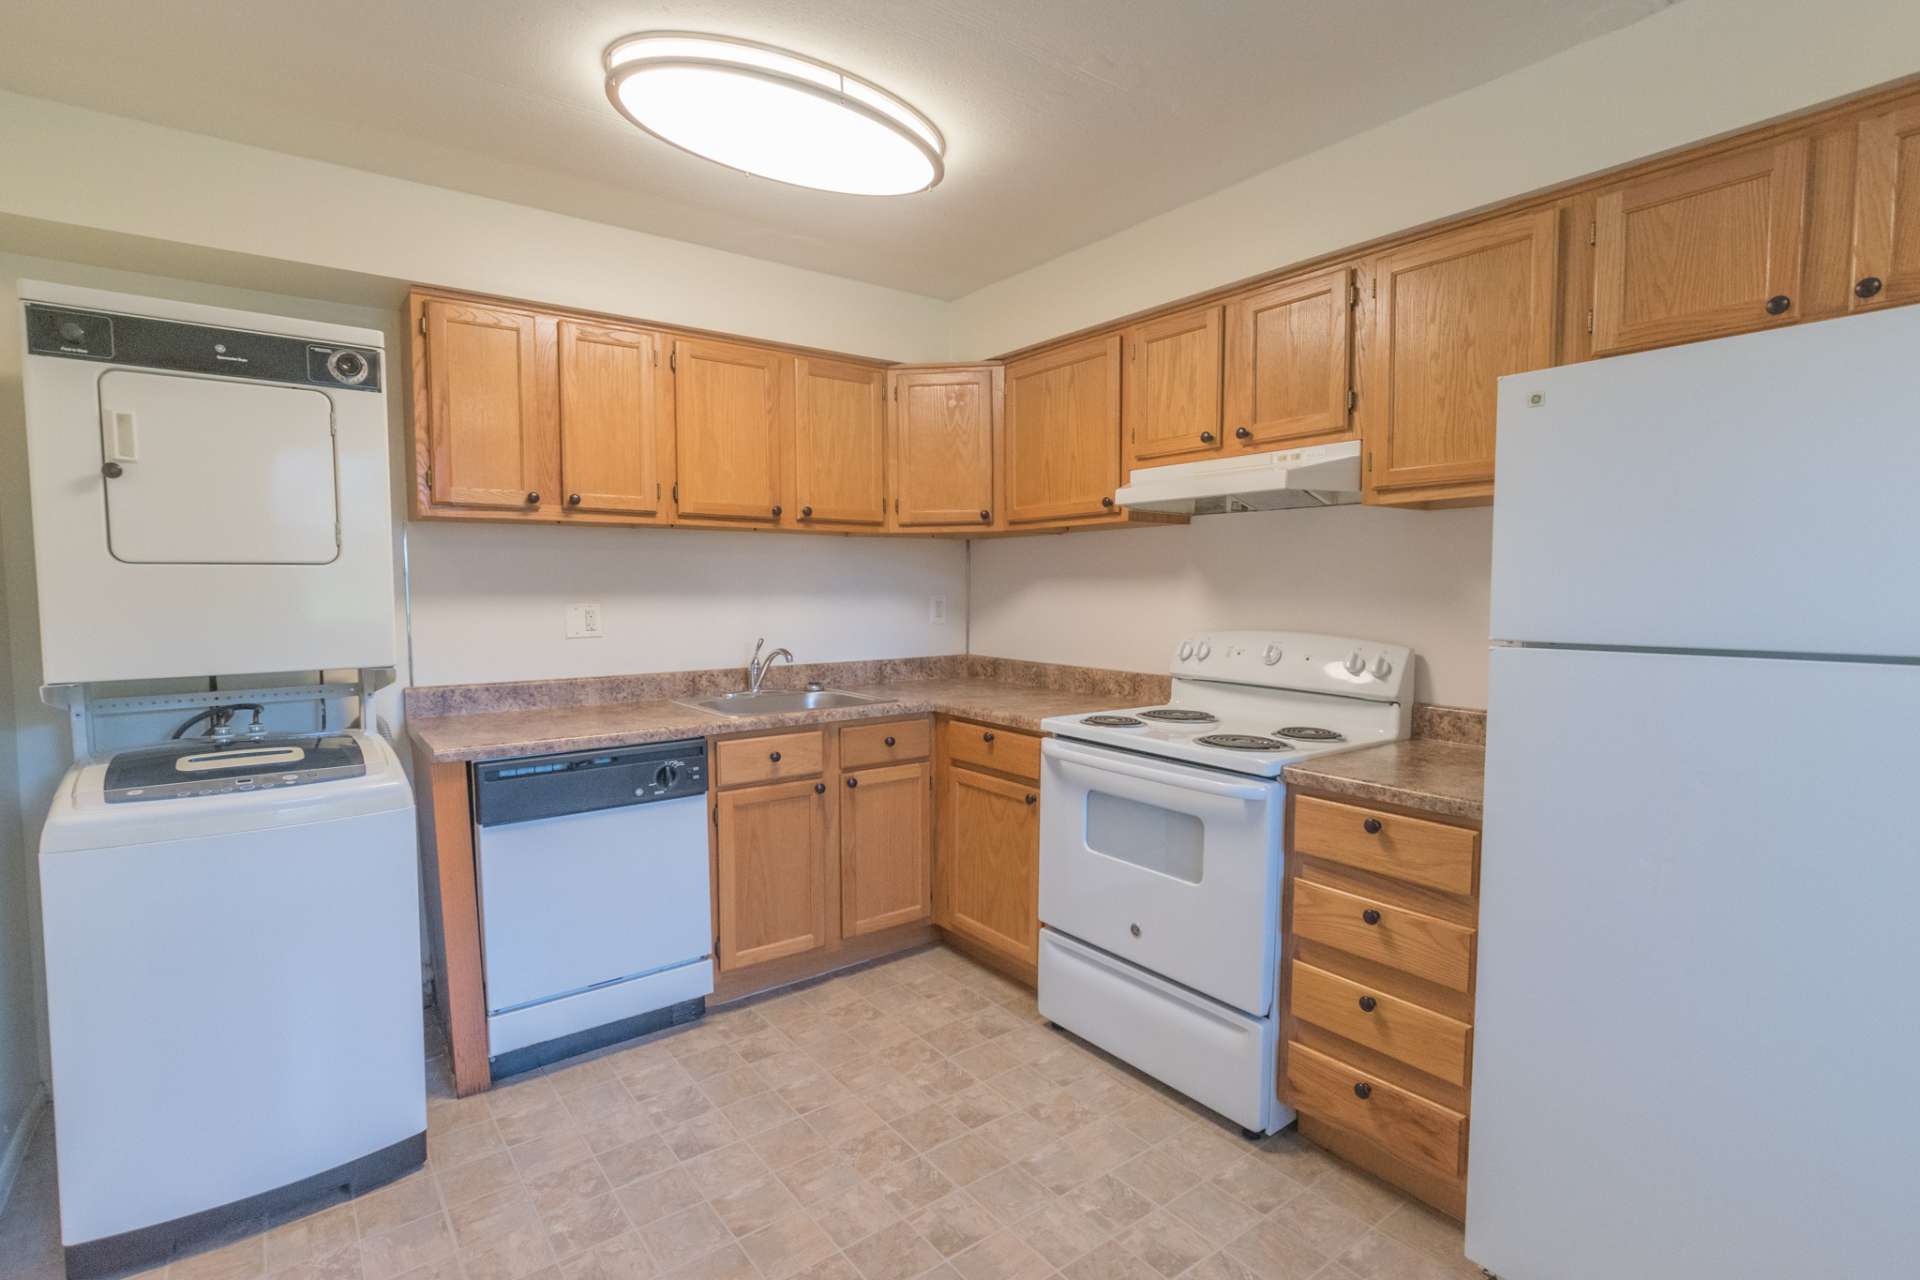 Willow Run Apartments kitchen with brown cabinets and white appliances